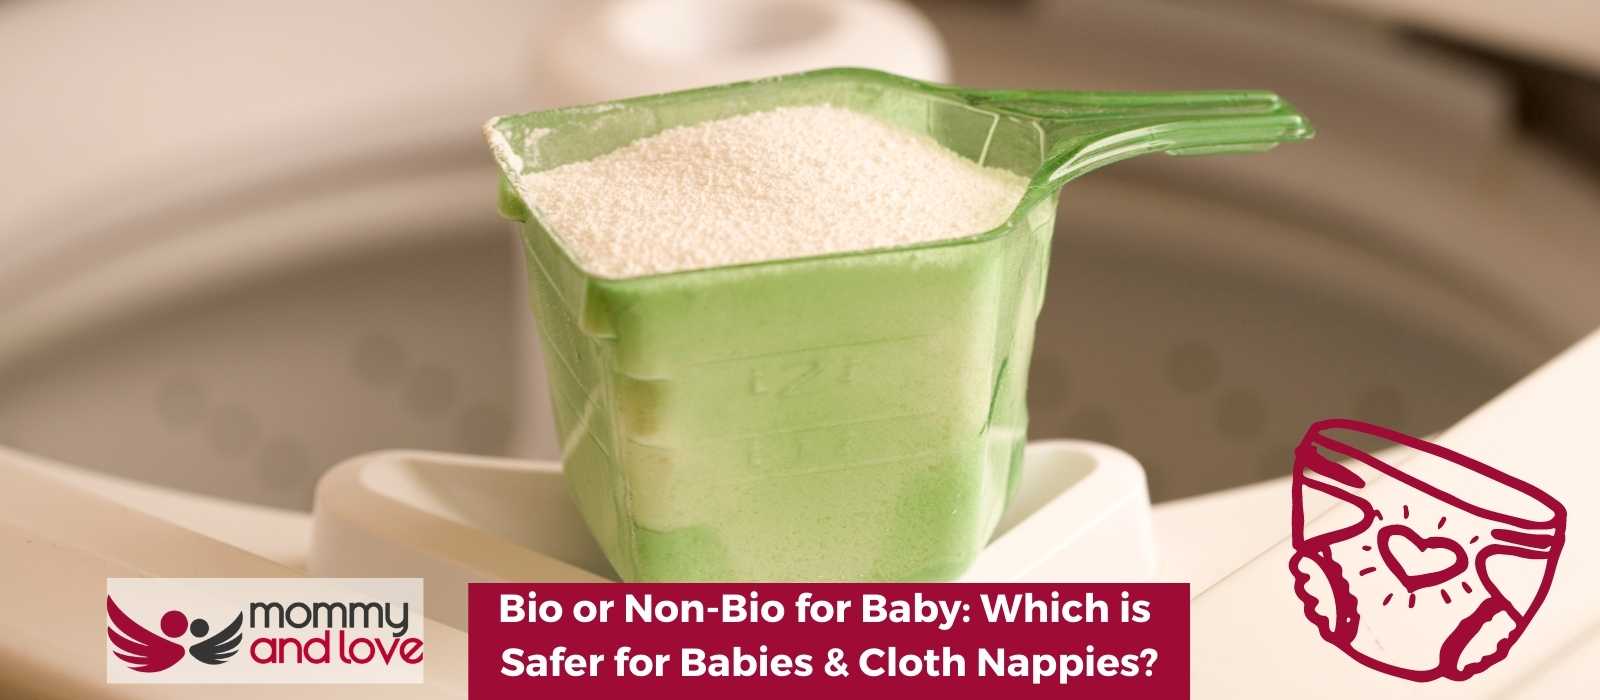 Bio or Non-Bio for Baby Which is Safer for Babies & Cloth Nappies